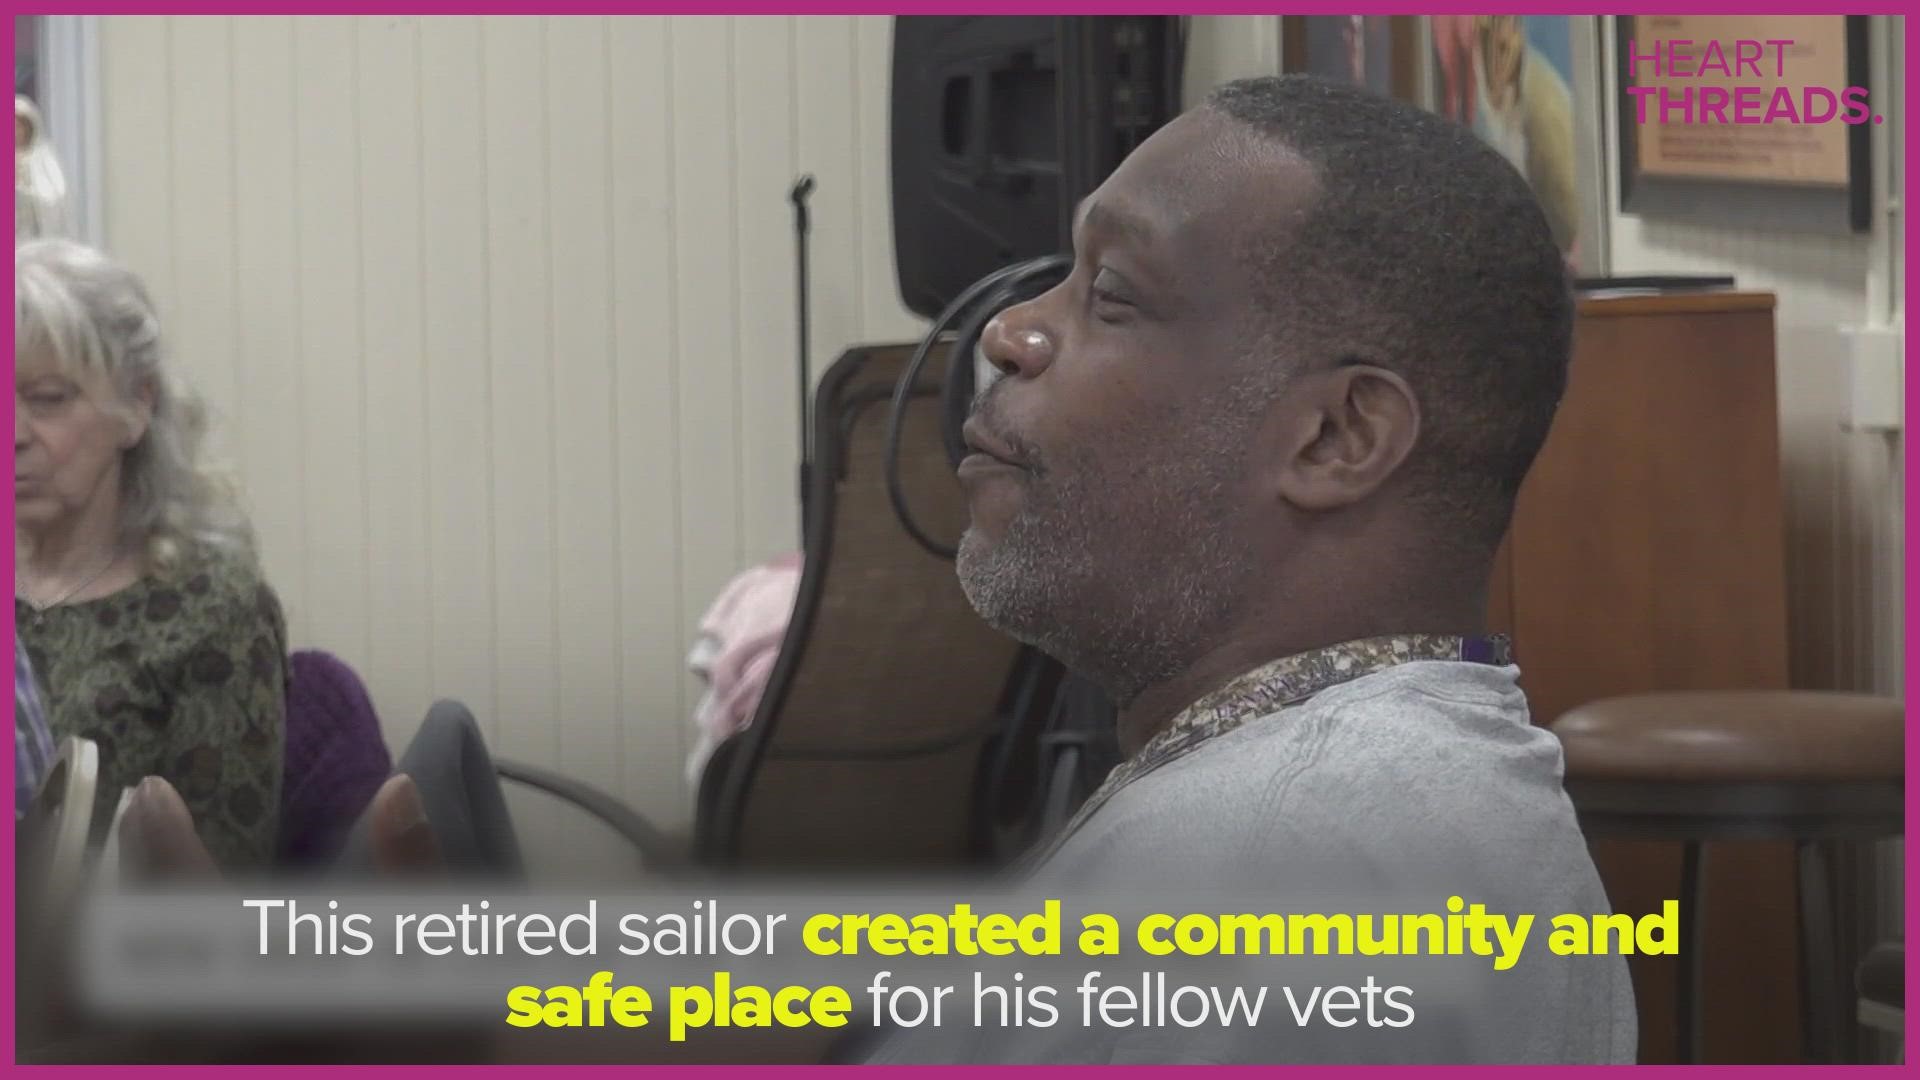 Reggie Howard saw a need for his fellow veterans to have a place to come together, so he created Hero's Corner.